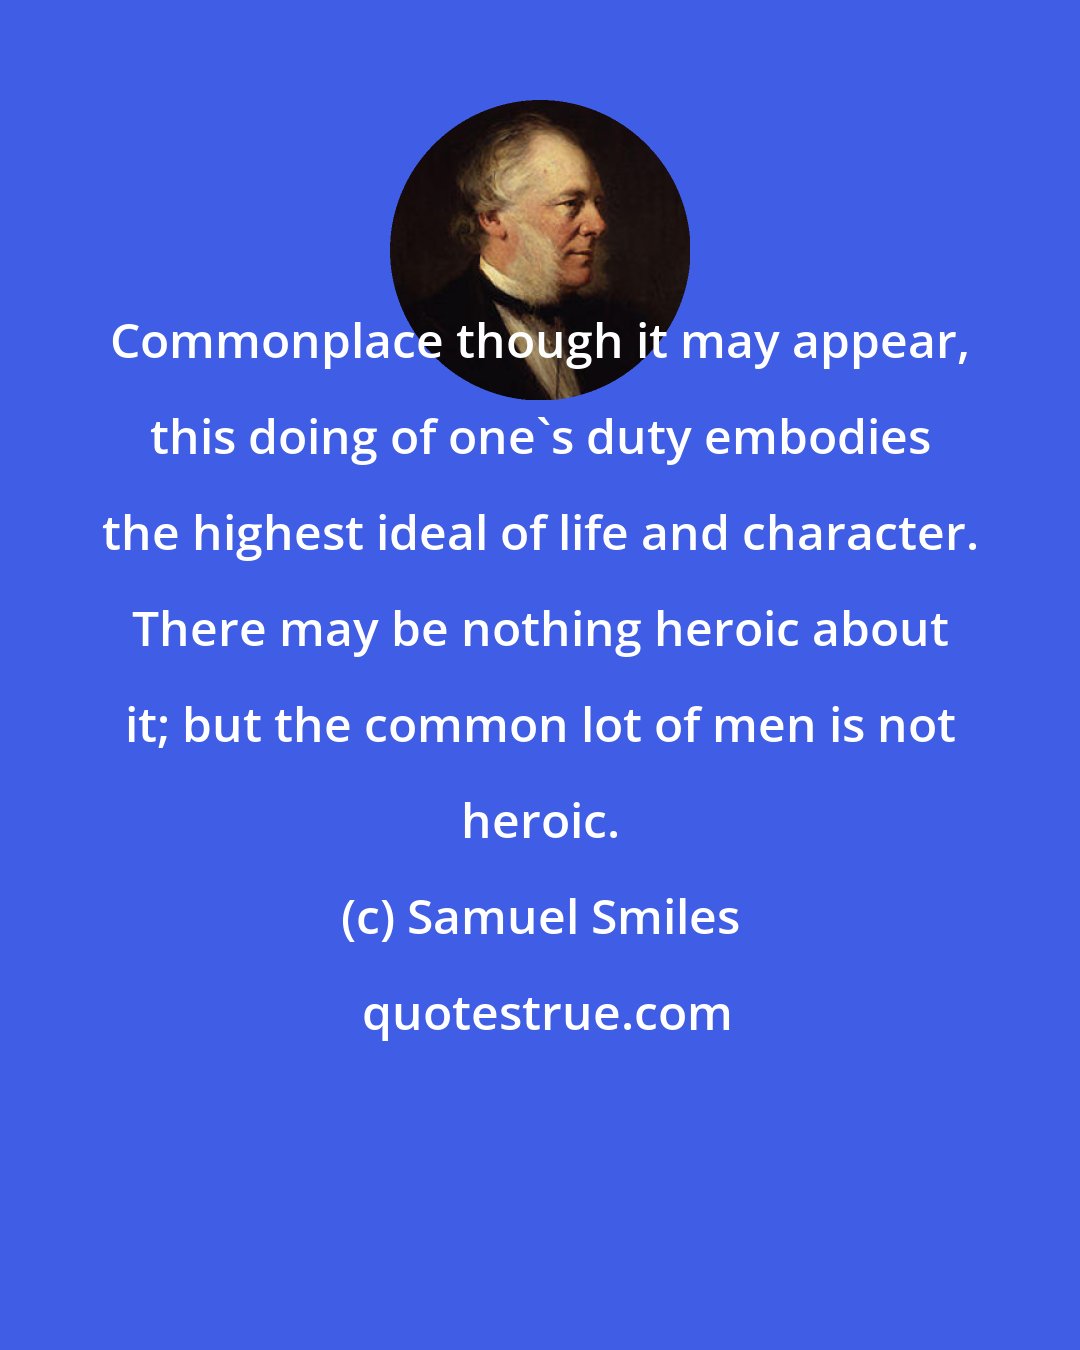 Samuel Smiles: Commonplace though it may appear, this doing of one's duty embodies the highest ideal of life and character. There may be nothing heroic about it; but the common lot of men is not heroic.